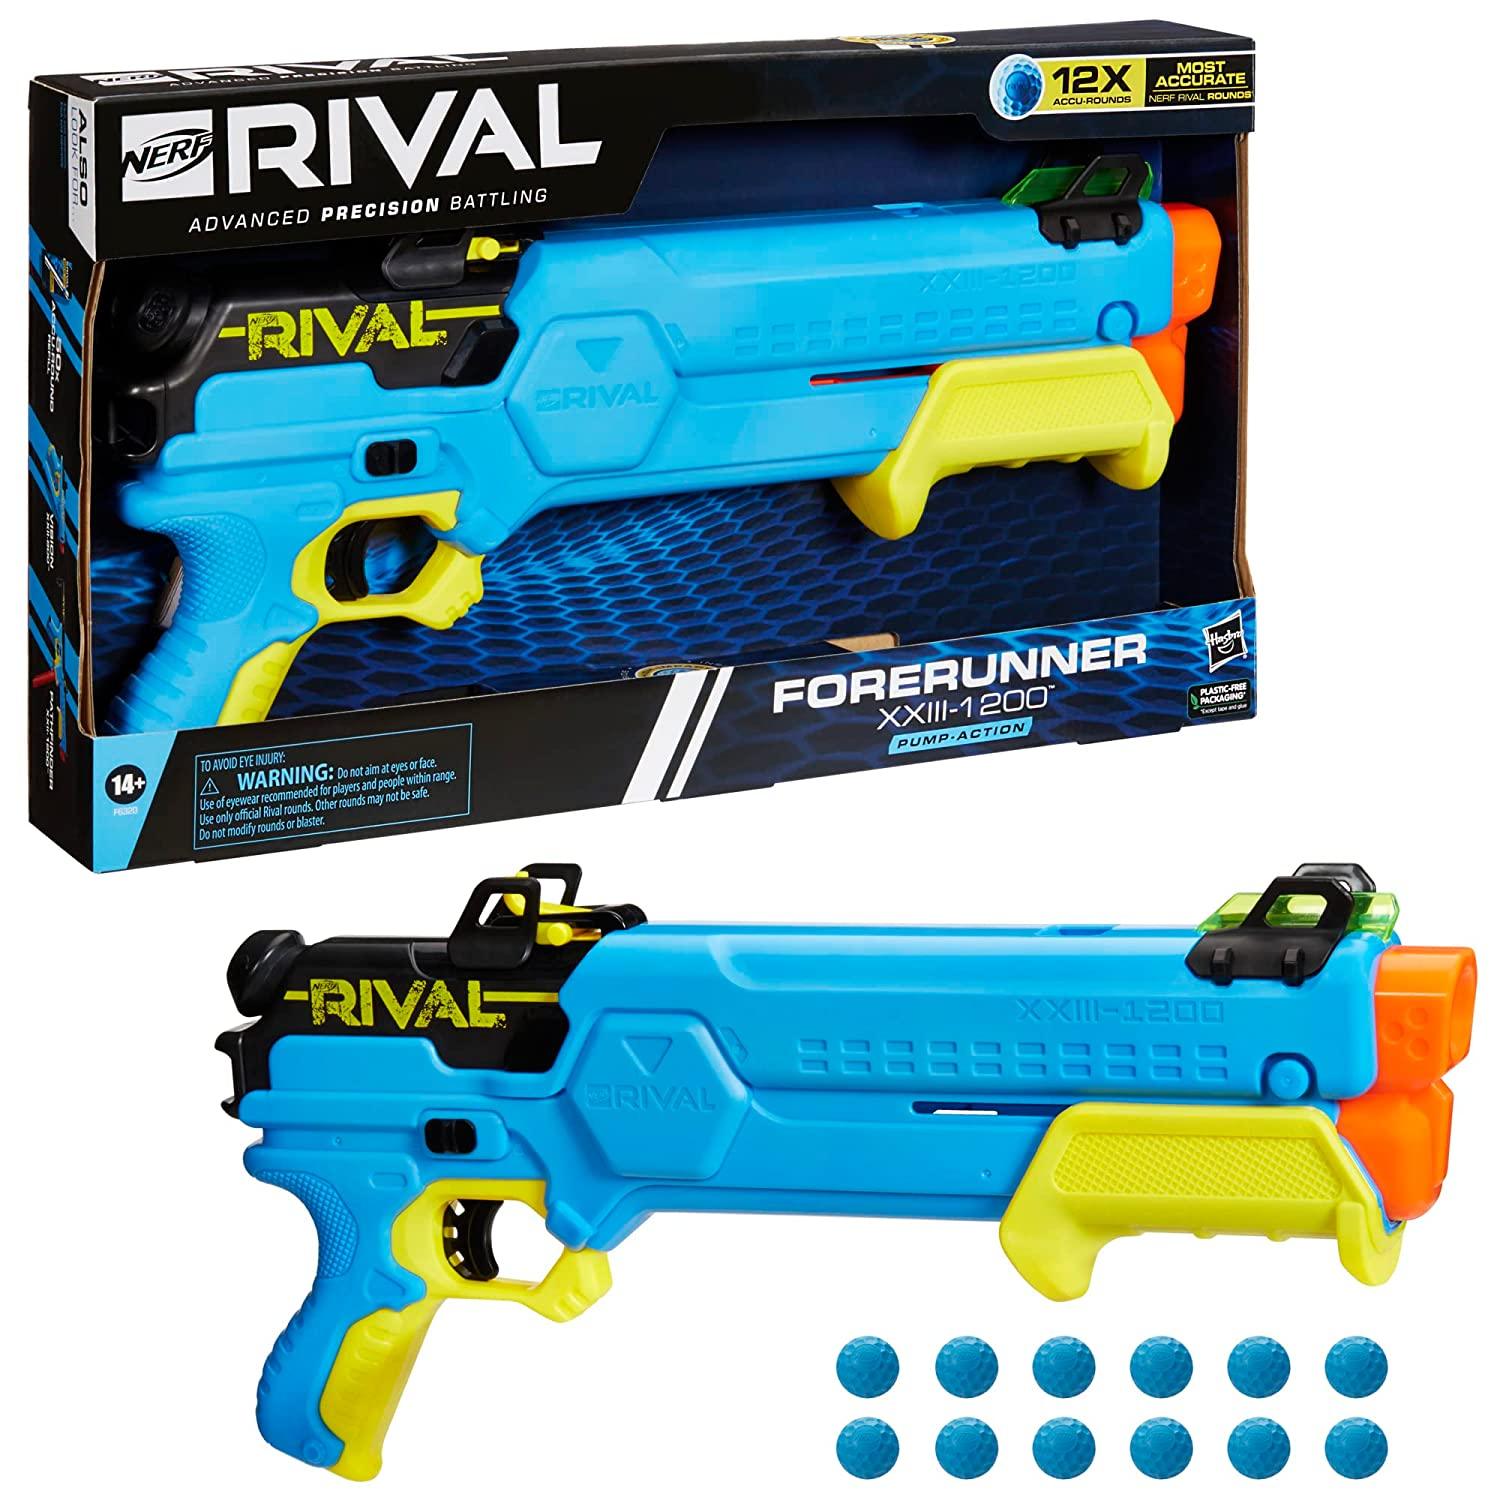 Nerf Rival Forerunner XXIII-1200 Blaster, 12 Round Capacity, 12 Nerf Rival Accu-Rounds, Most Accurate Nerf Rival System, Adjustable Sight - FunCorp India